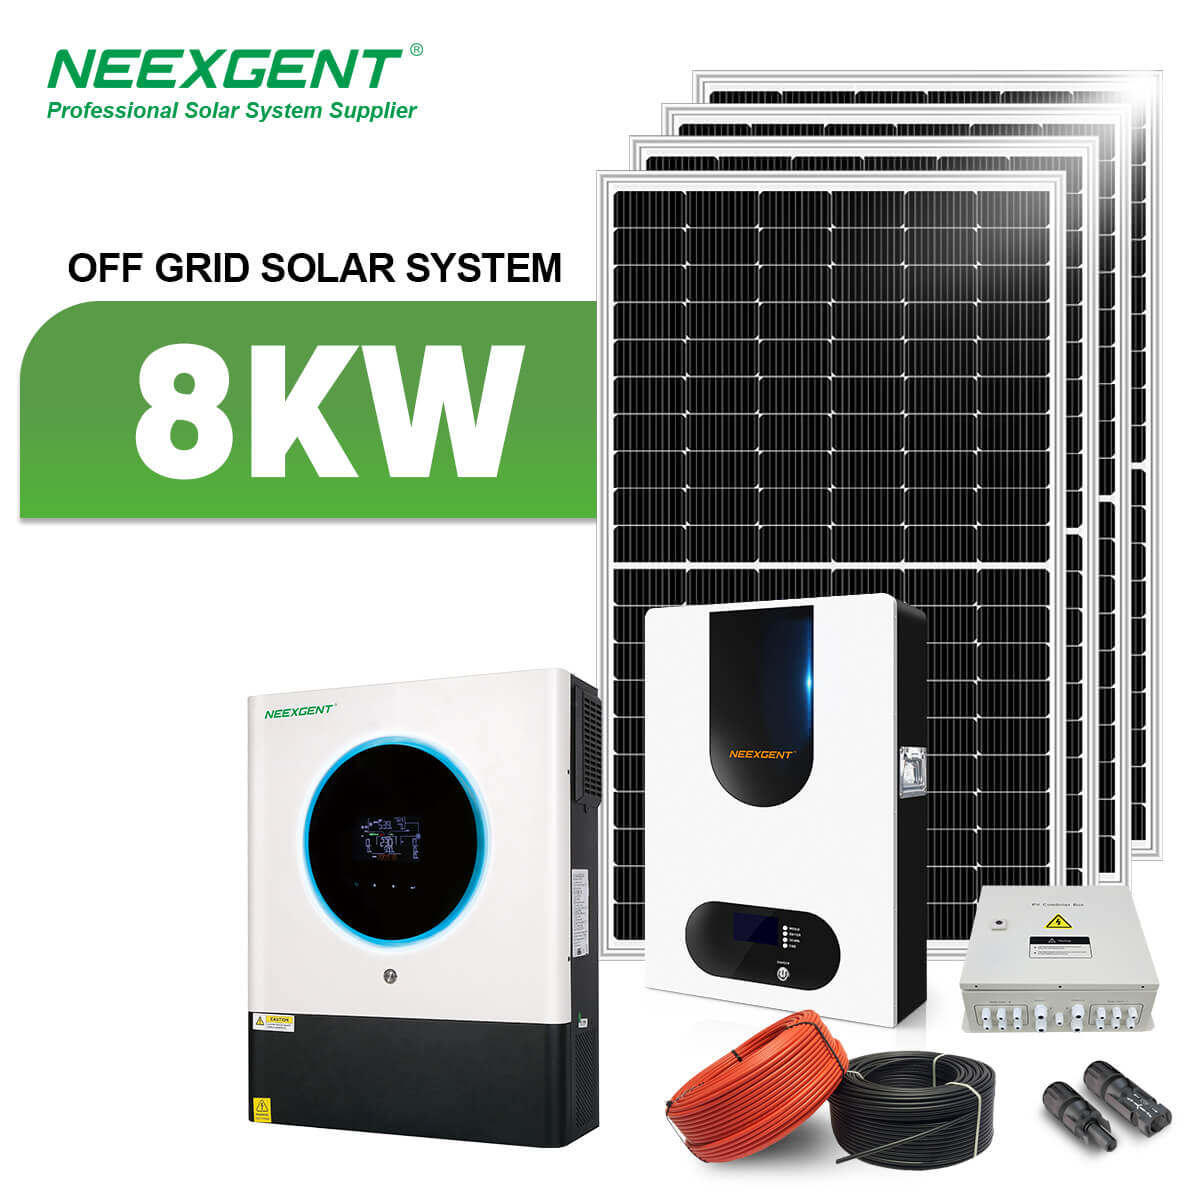 Neexgent Home Solar Panel Product Kit Pv Energy Mounting Supply 8 Kw Off Grid Solar Inverter Solar Power System